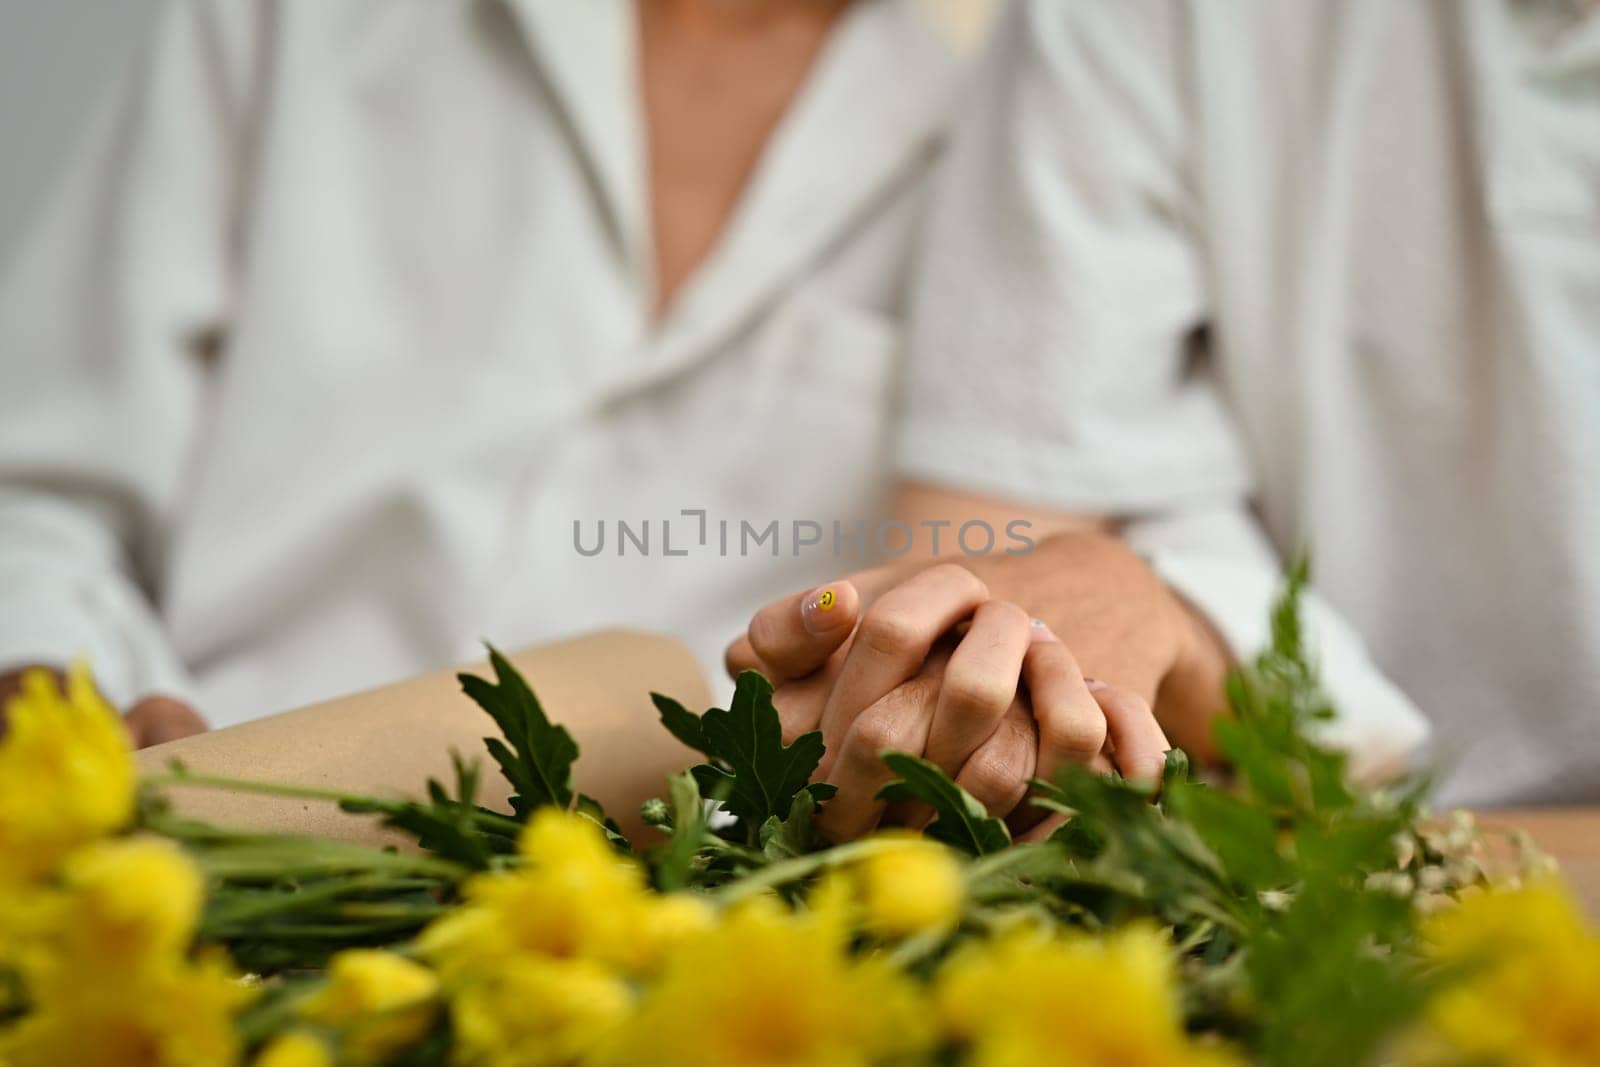 Anonymous gay couple clasping hands as symbol of homosexual love on table with flowers. LGBT, love and human rights concept by prathanchorruangsak